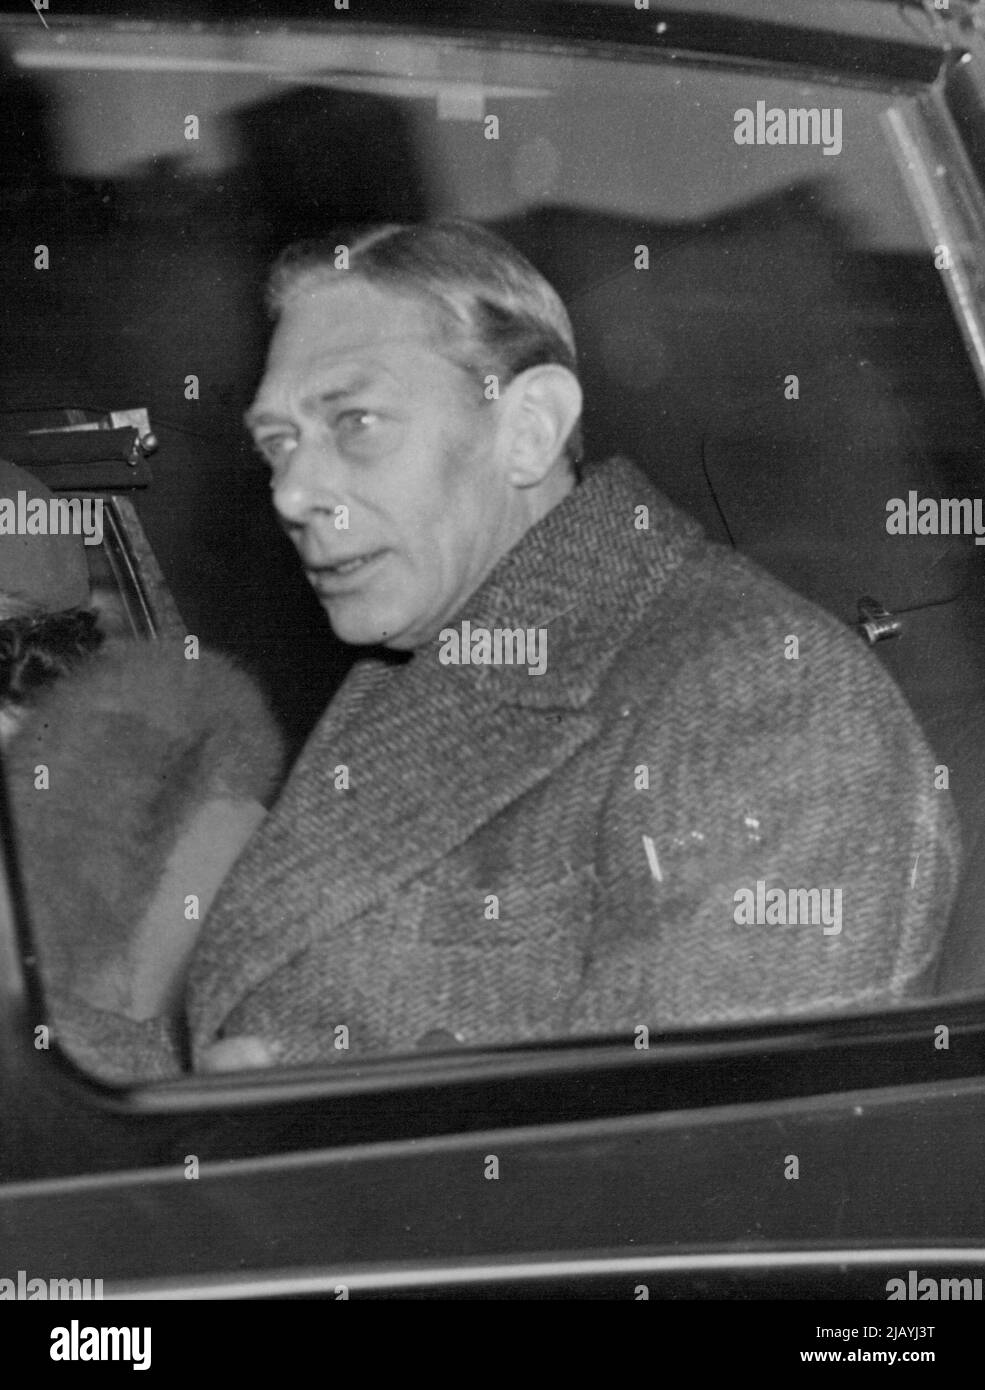 Back From Sandringham: The King leaves London's Kings Cross by car en route to Buckingham Palace at the end of the Royal Holiday at Sandringham today January 28. February 07, 1952. (Photo by Associated Press Photo). Stock Photo